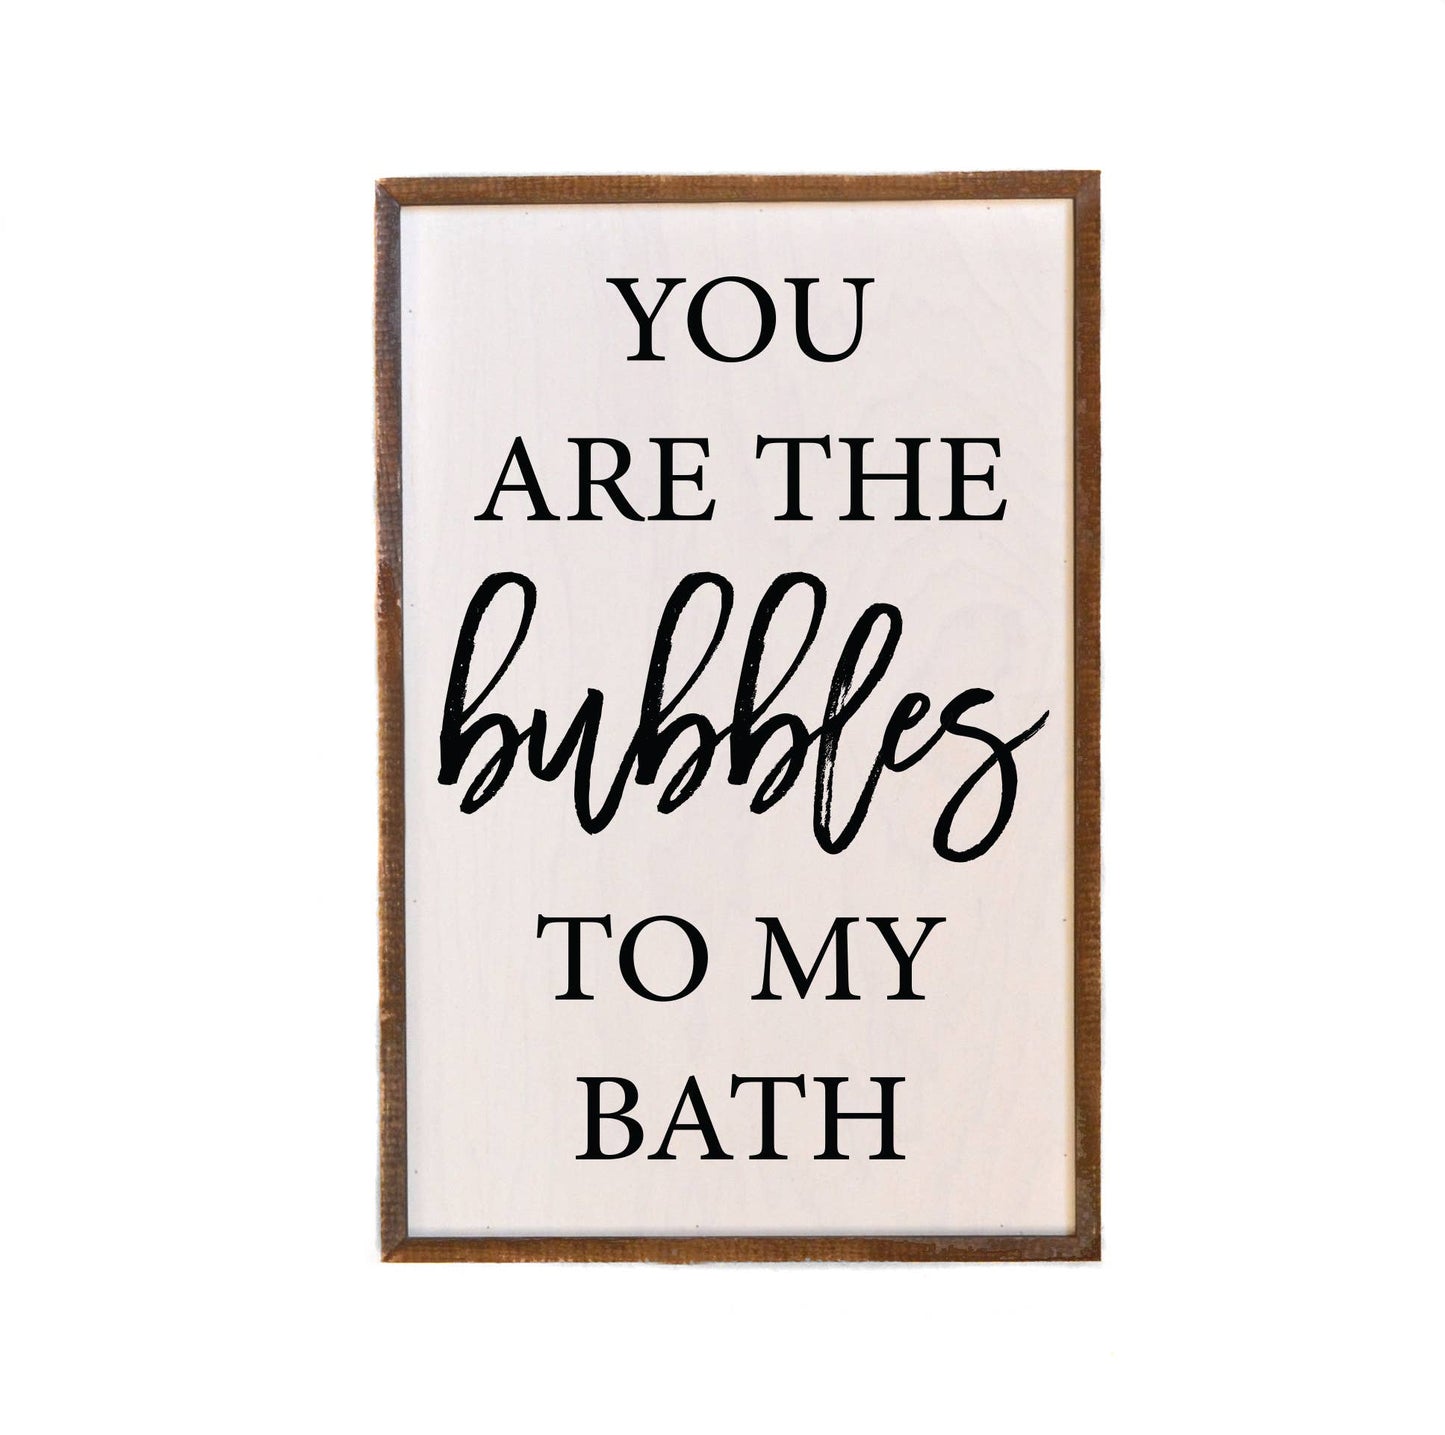 The Bubbles To My Bath 12x18 Wood Sign